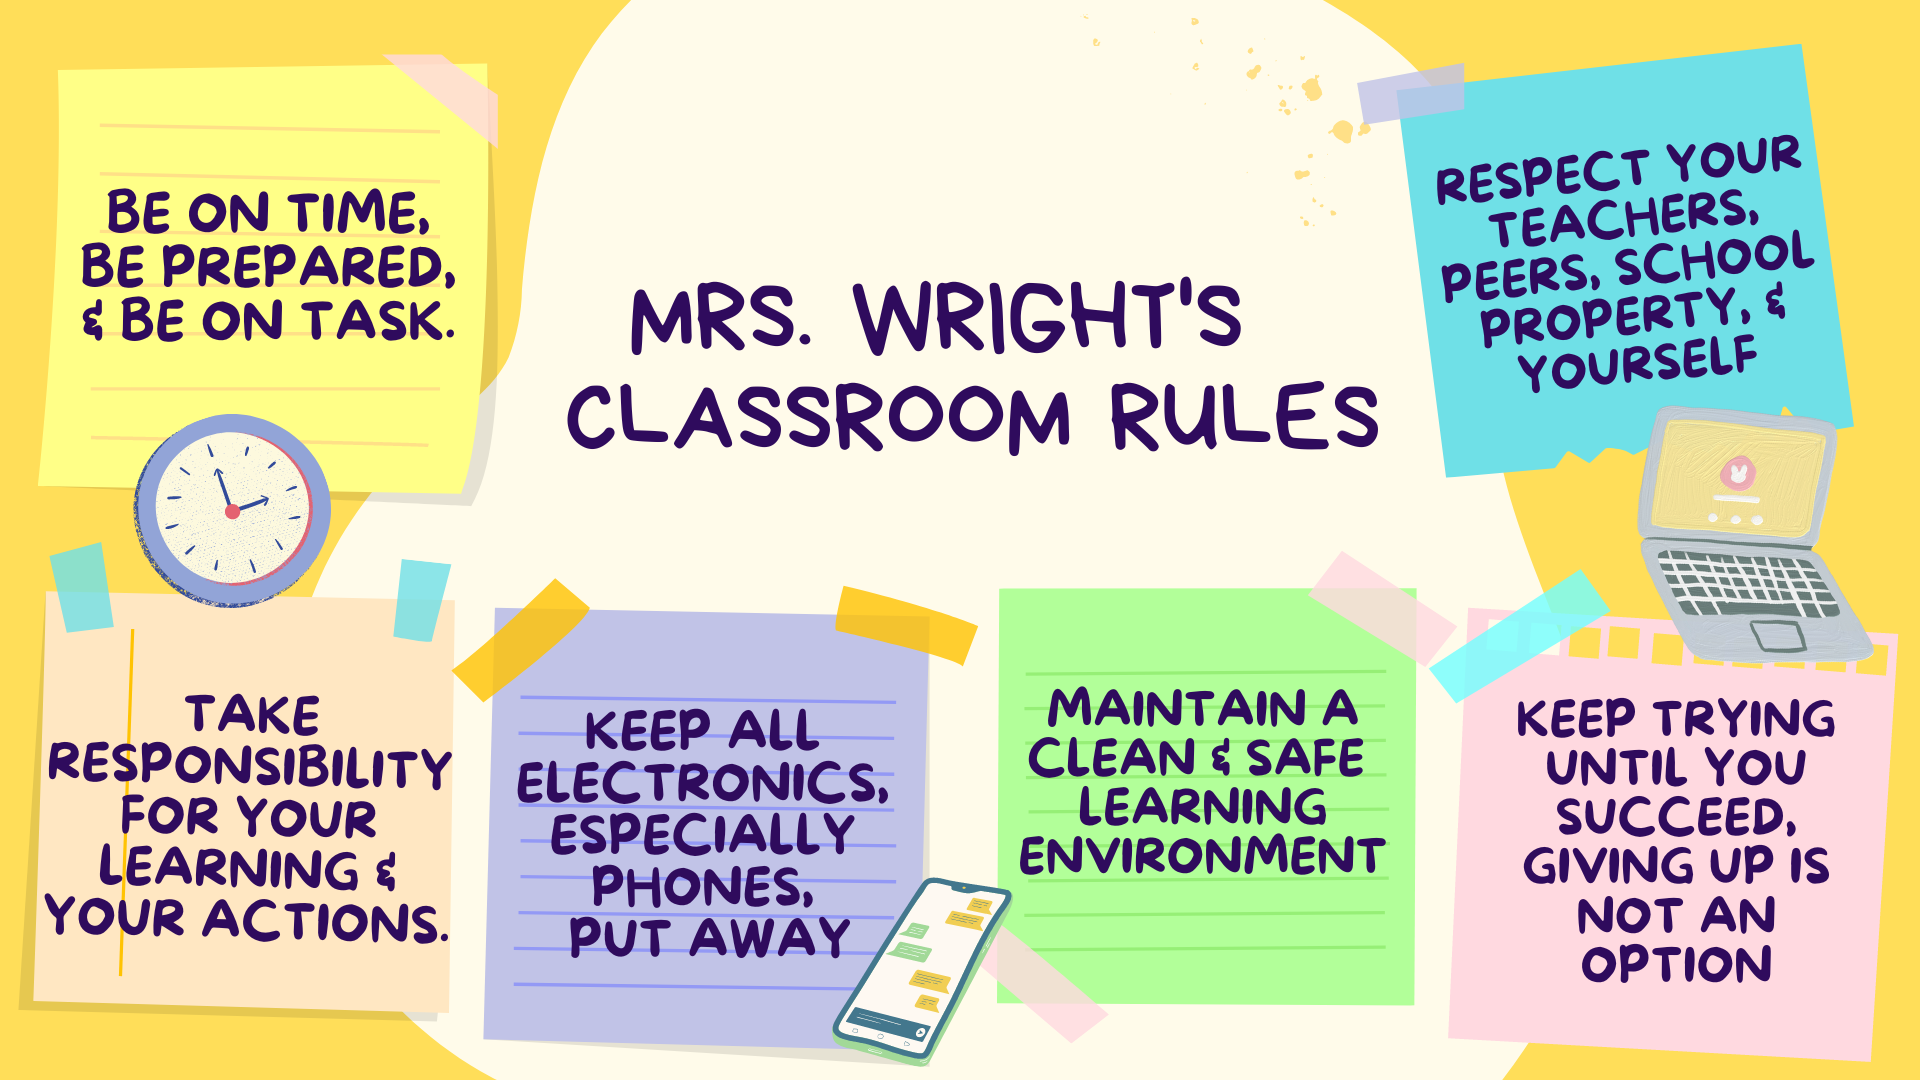 Fun and Eye Catching Our Classroom Rules Poster  (Presentation (169)).png